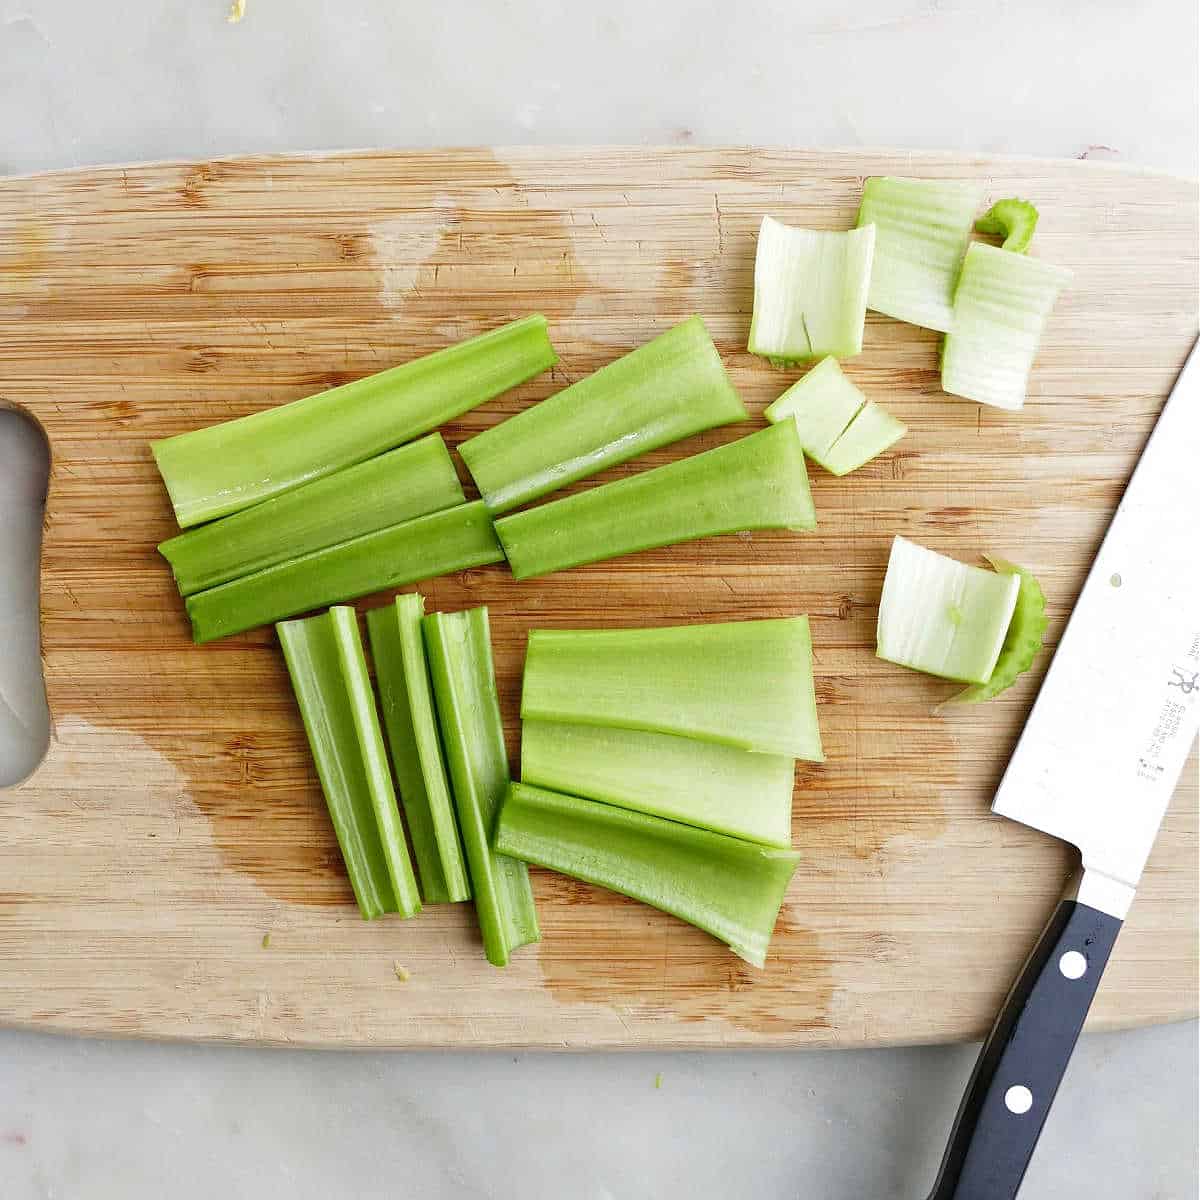 celery cut into sticks for stuffing on a cutting board with knife